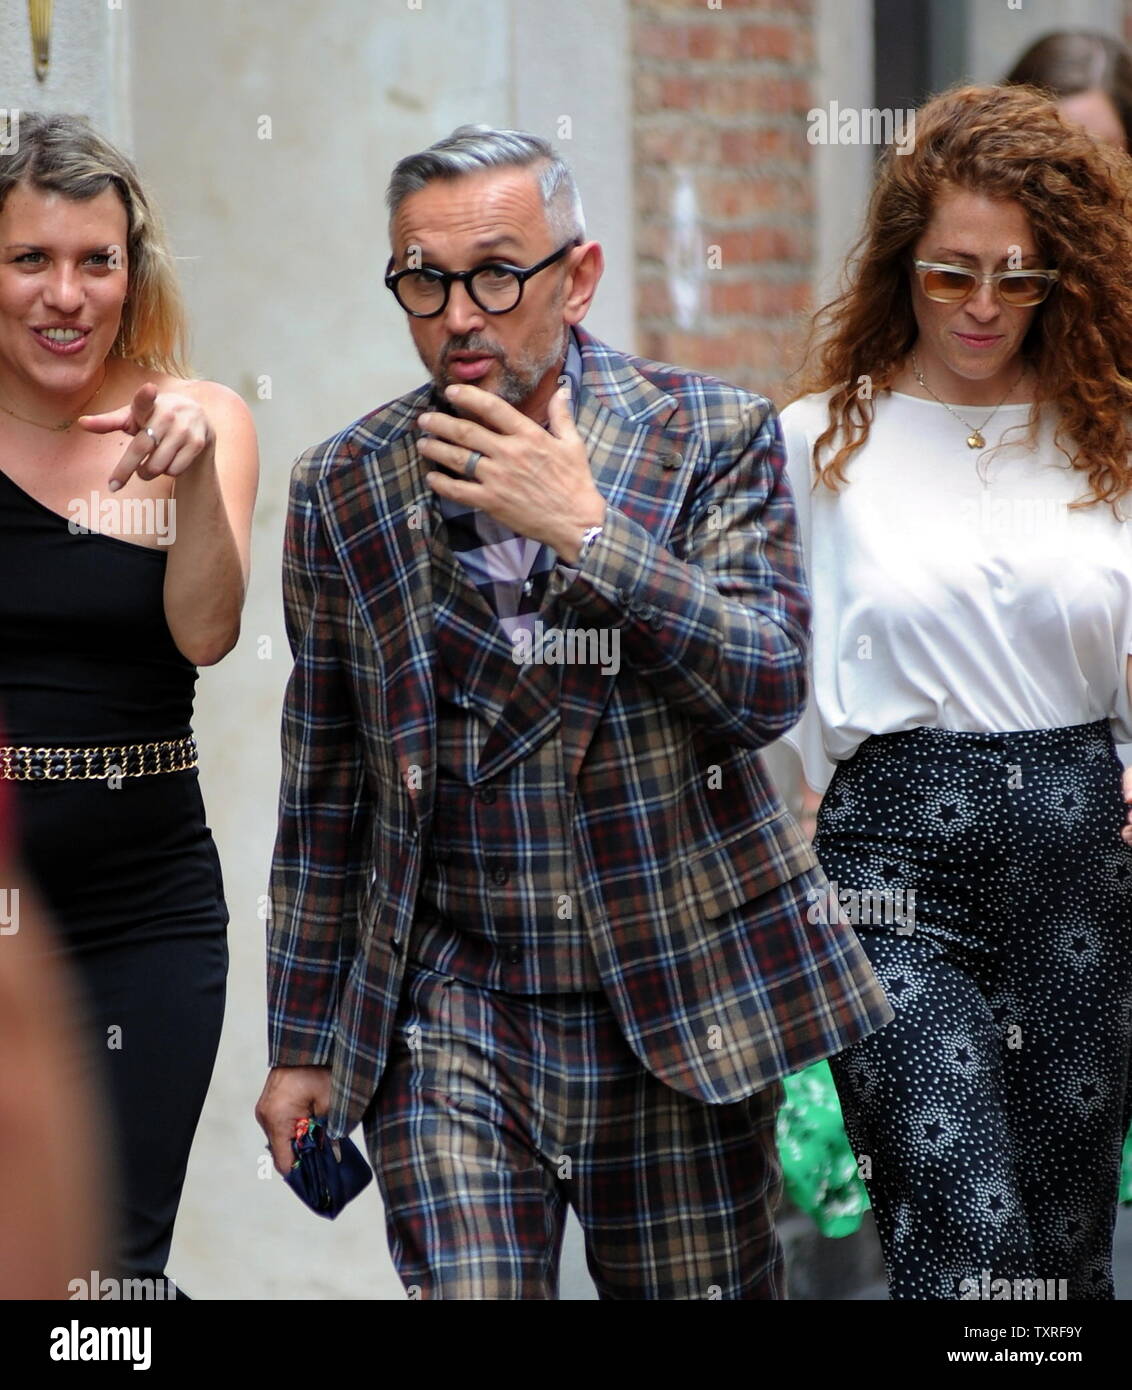 Milan, Bruno Barbieri in the center to shoot a new Masterchef commercial  Chef BRUNO BARBIERI arrives downtown accompanied by two production girls  and heads for ARMANI's restaurant in Via Manzoni, where the